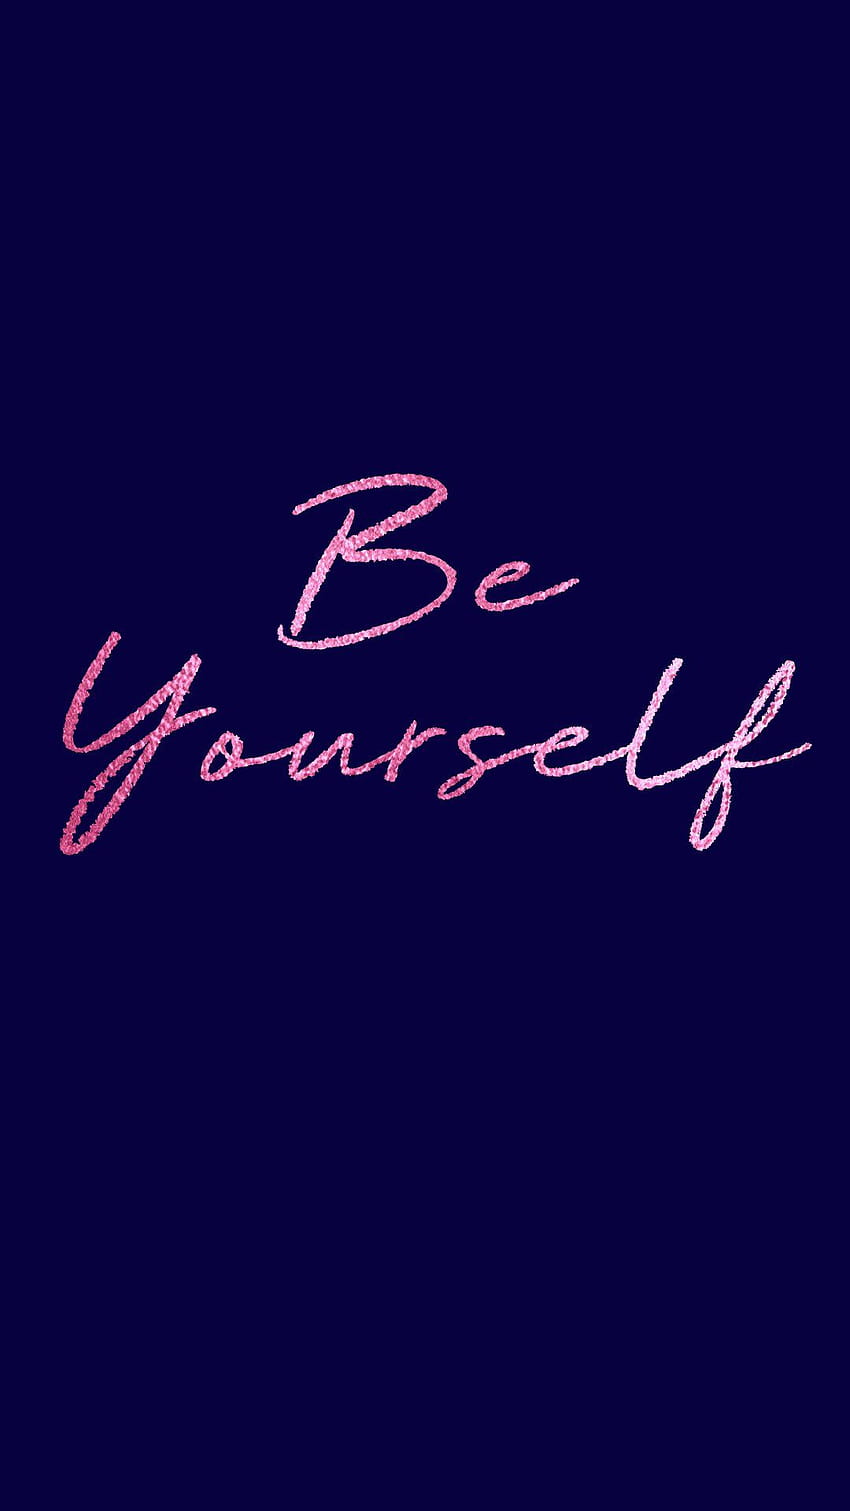 Be Yourself wallpaper by romie96  Download on ZEDGE  9ef9